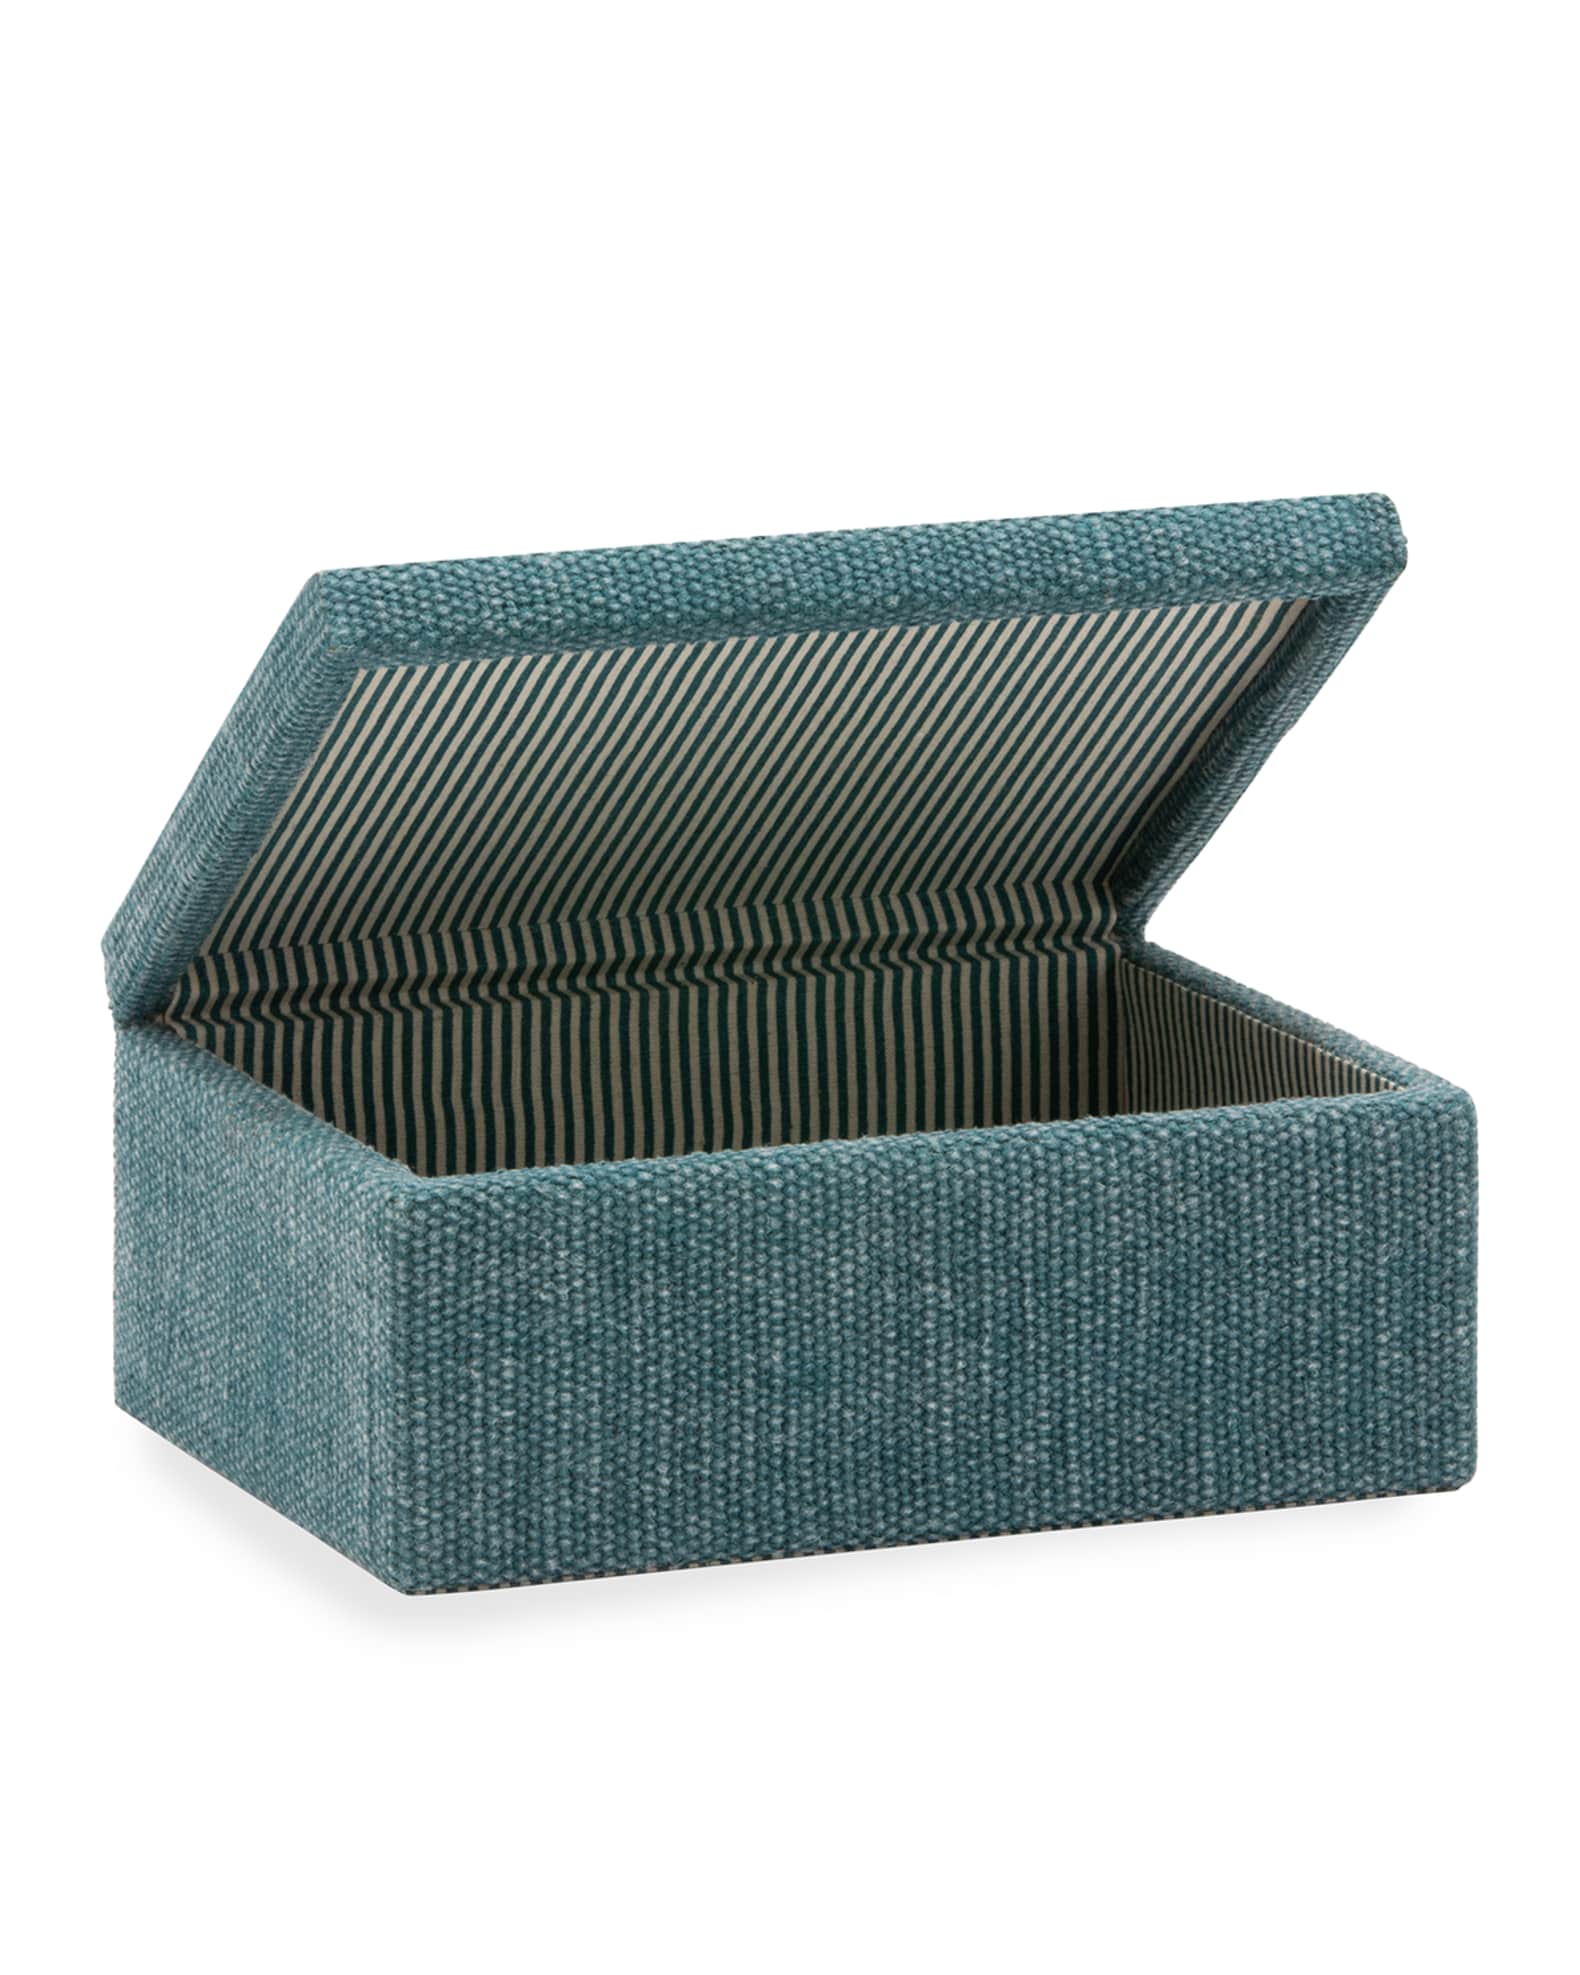 Pigeon and Poodle Blarney Box | Neiman Marcus